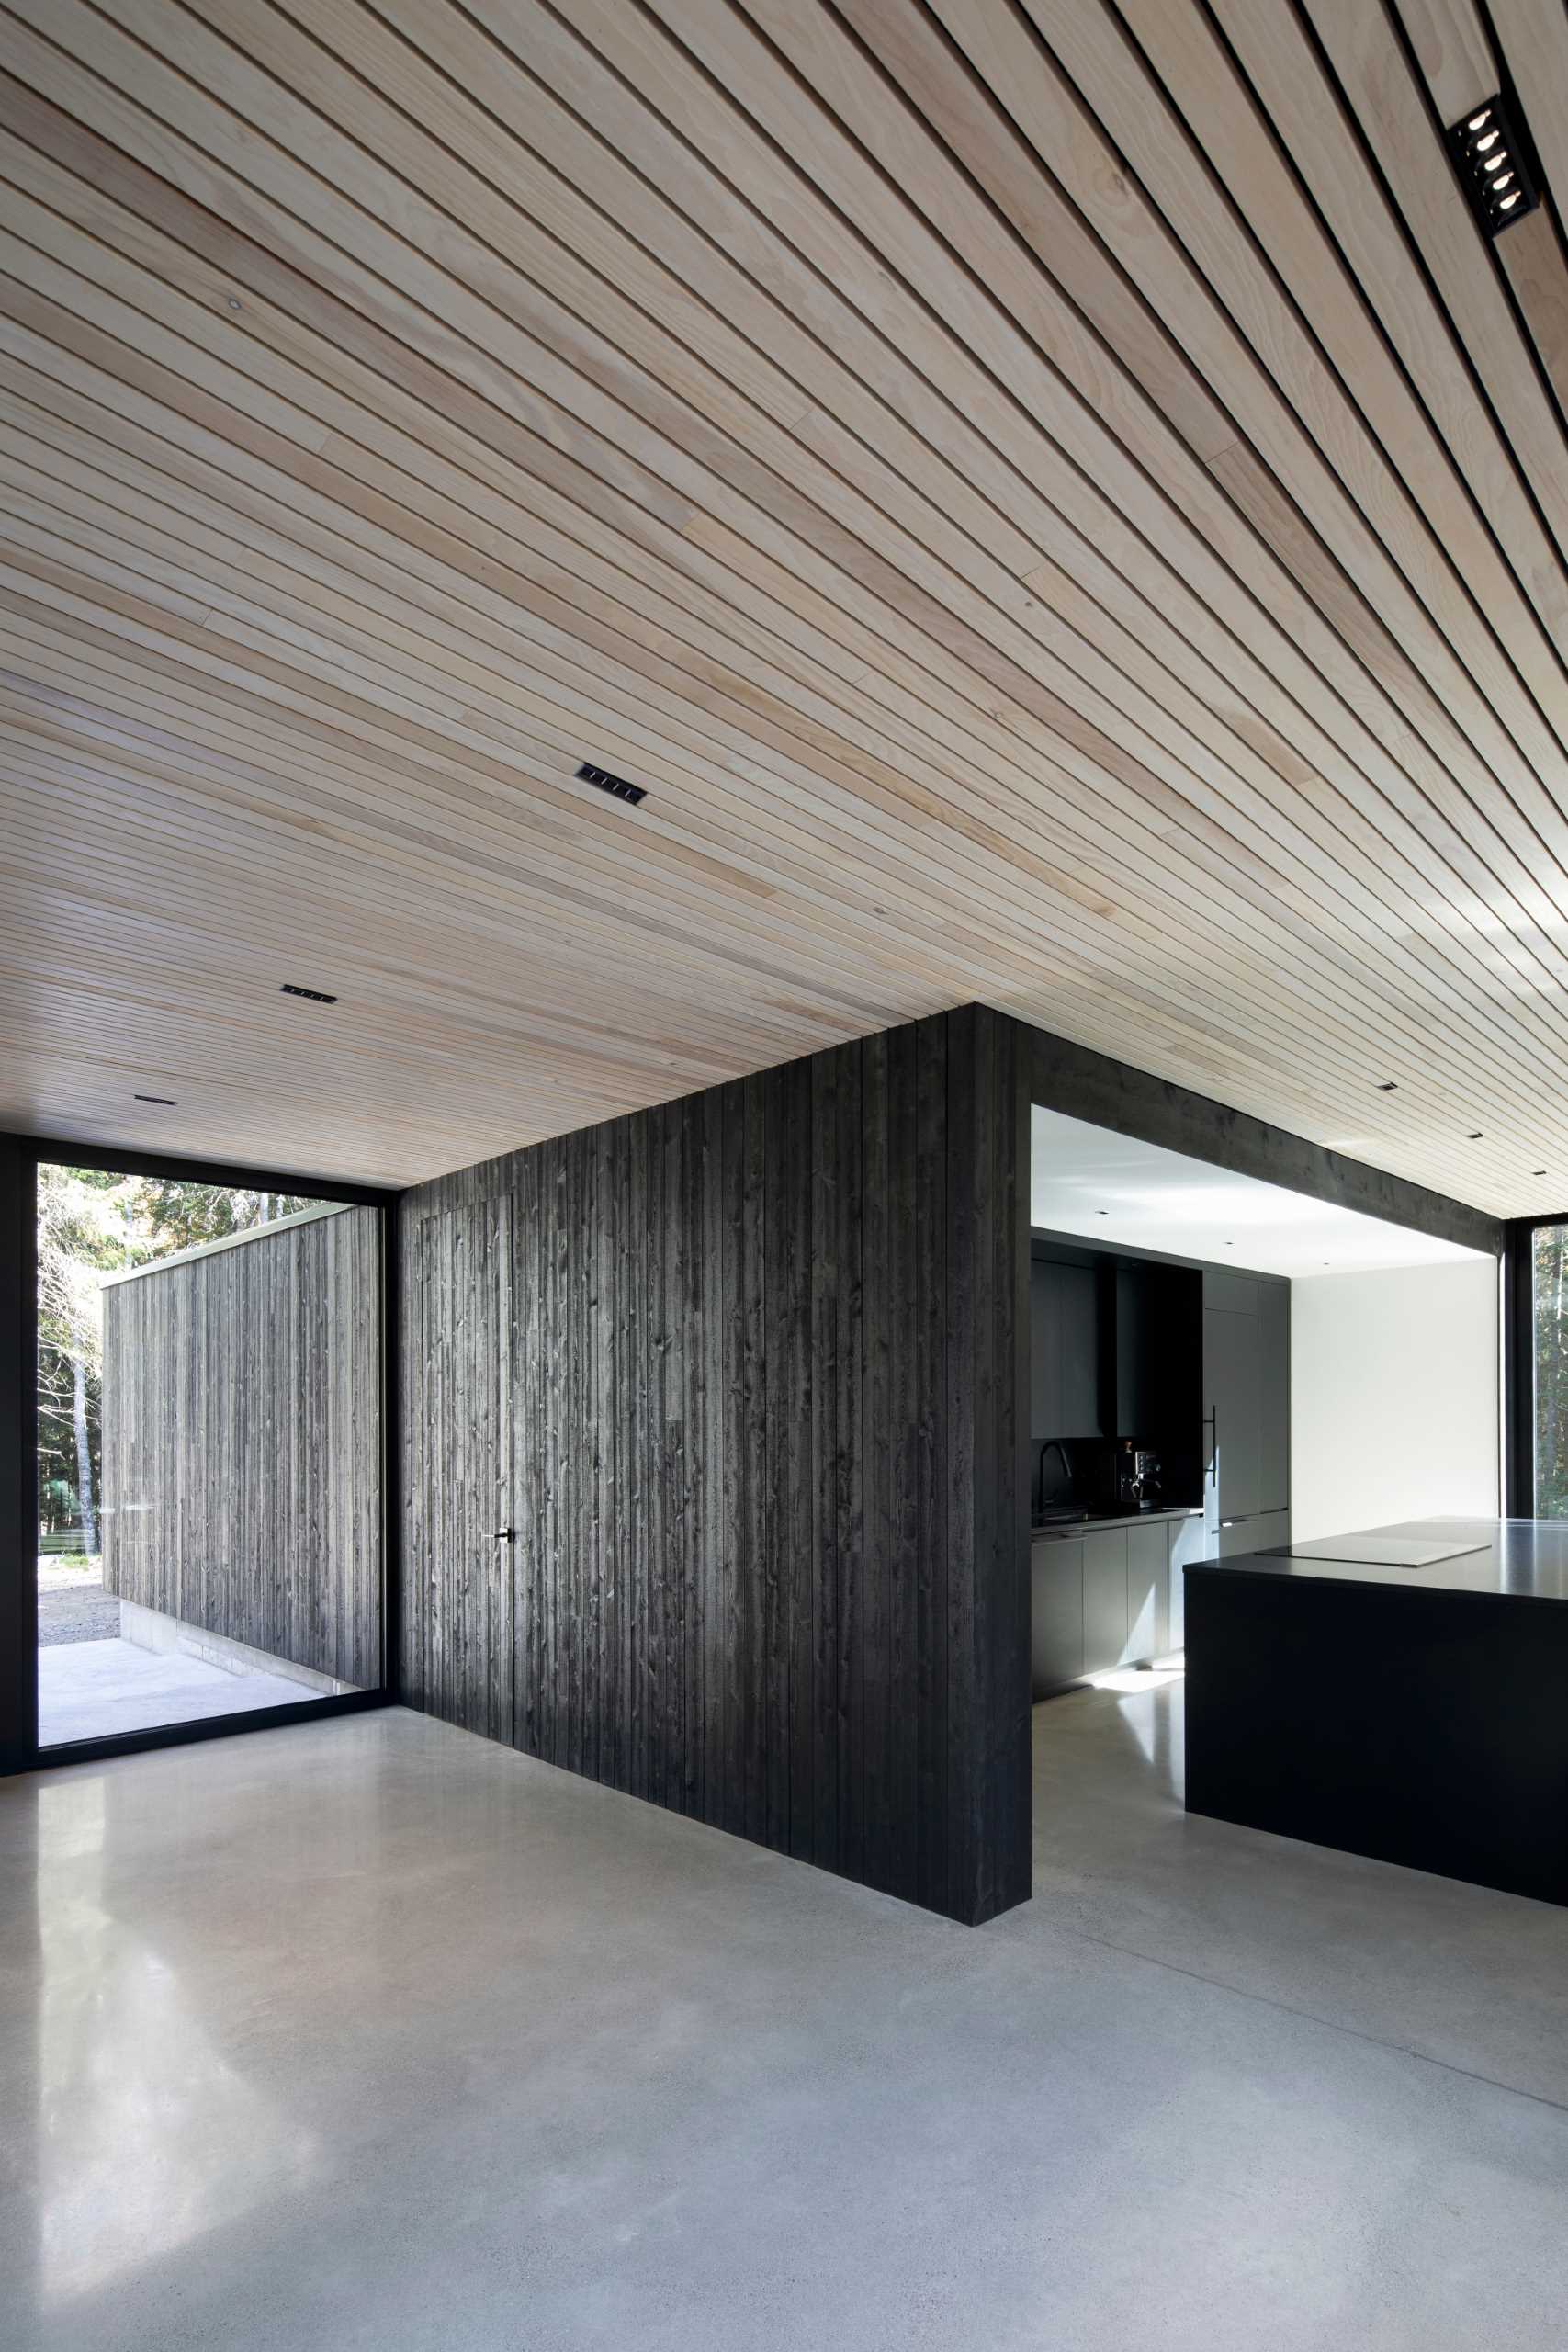 The entryway of this modern home provides glimpses of the interior, while concrete floors have been paired with a wood ceiling for a modern appearance.